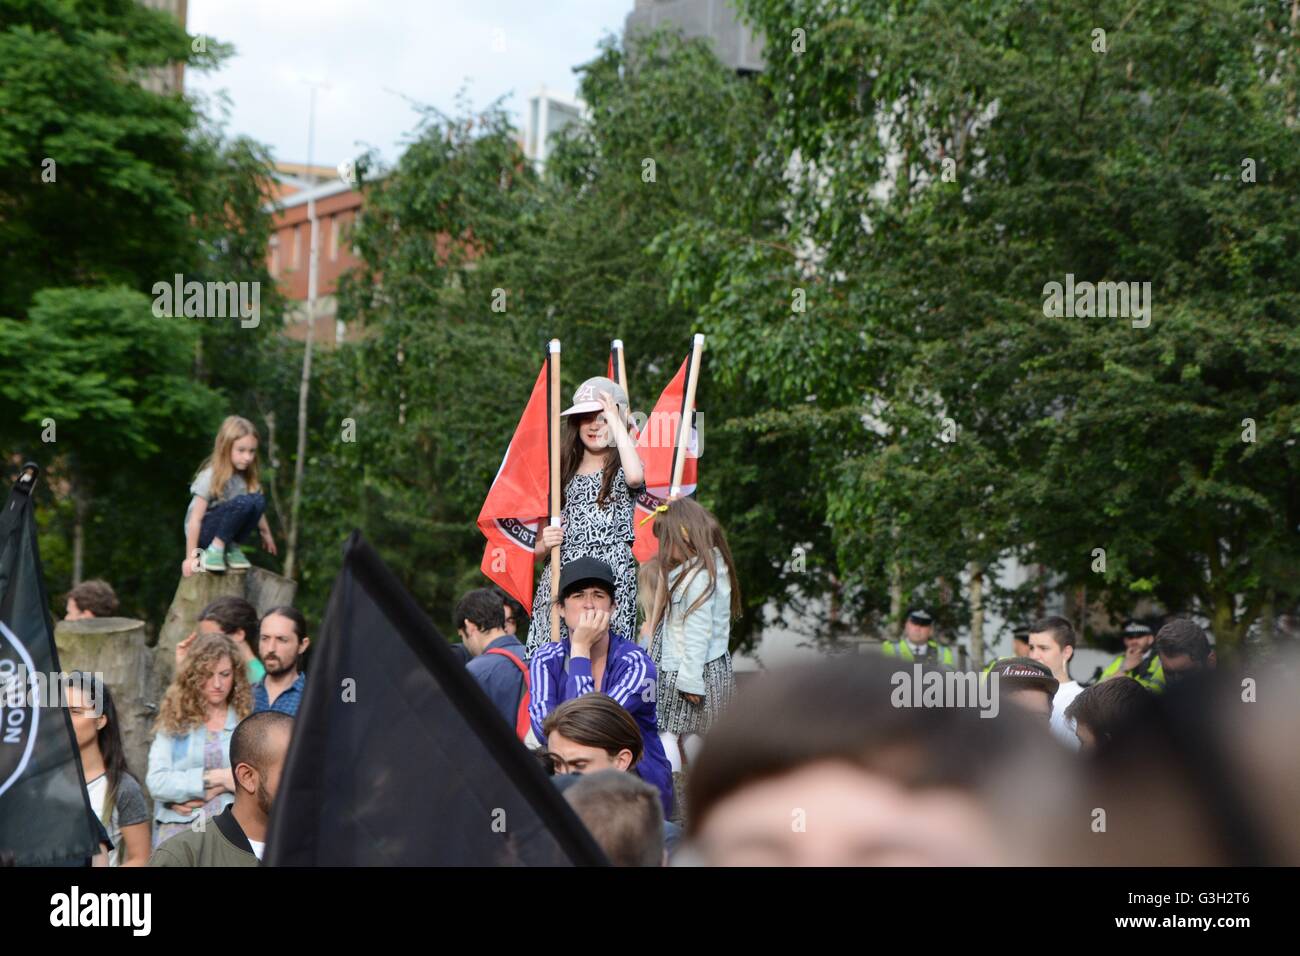 London, UK. 24 June, 2016. Pro-europe and migrant rally held in London.  A young girl stands with the anti-fascist flag. Credit:  Marc Ward/Alamy Live News Stock Photo